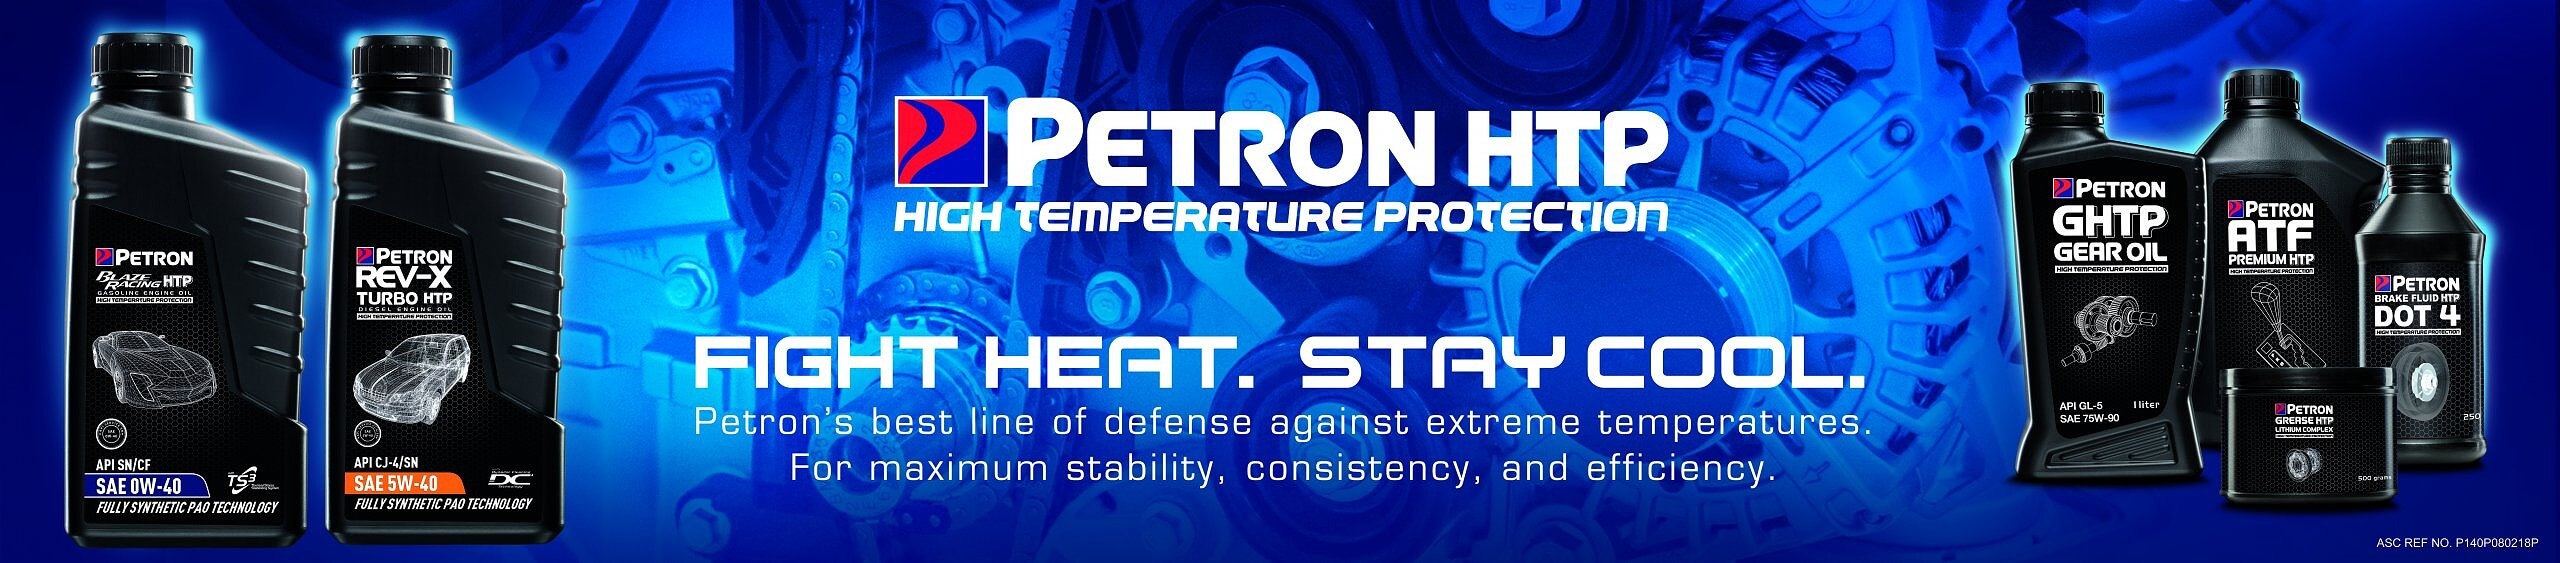 High Temperature Protection